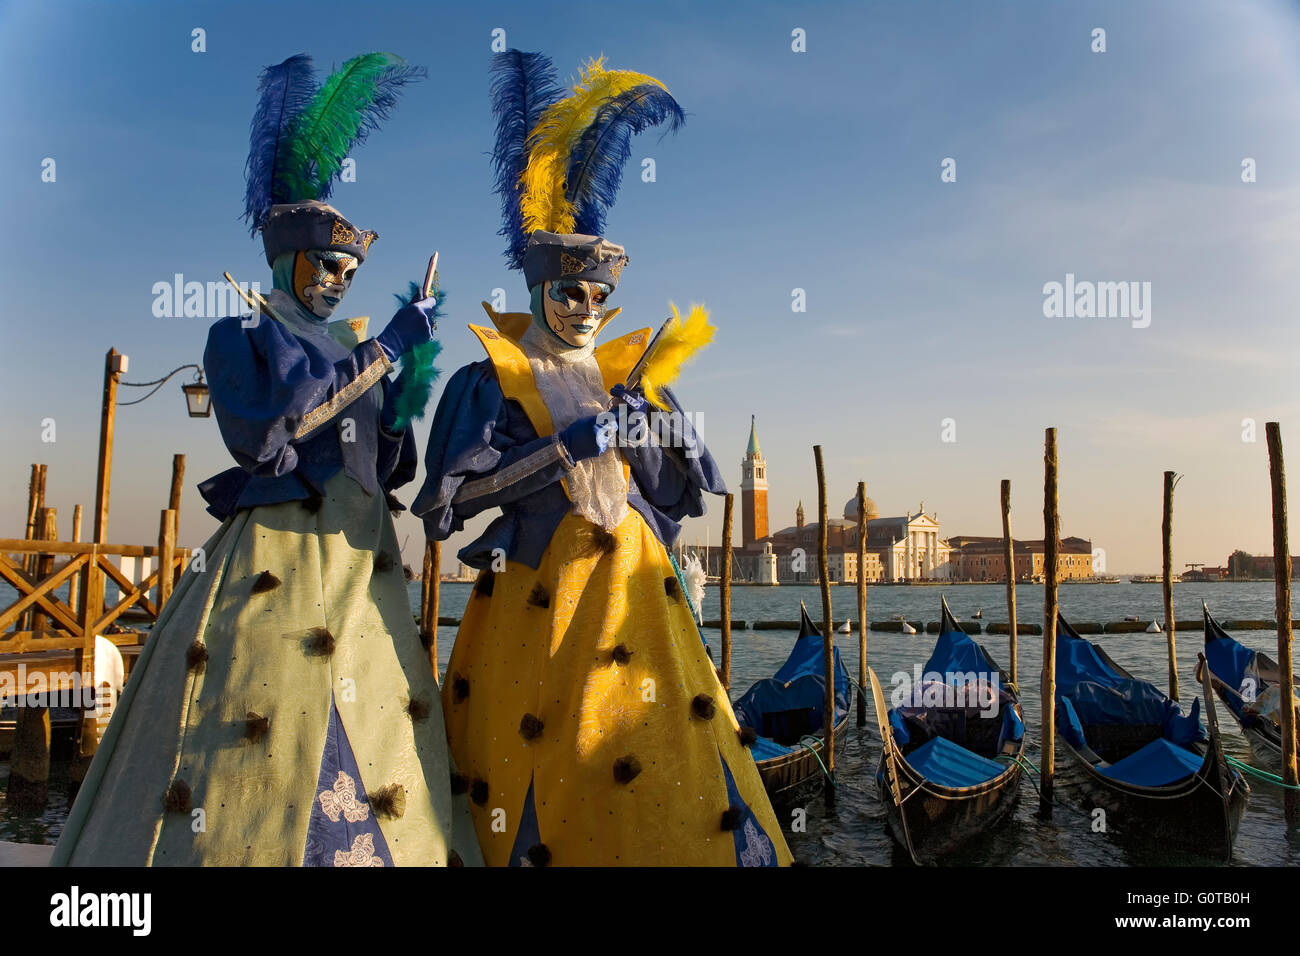 San Marco, Venice, Italy: elaborately-costumed Carnival revellers by the Basin of St Mark, with gondolas and the Chiesa di San Giorgio Maggiore beyond Stock Photo